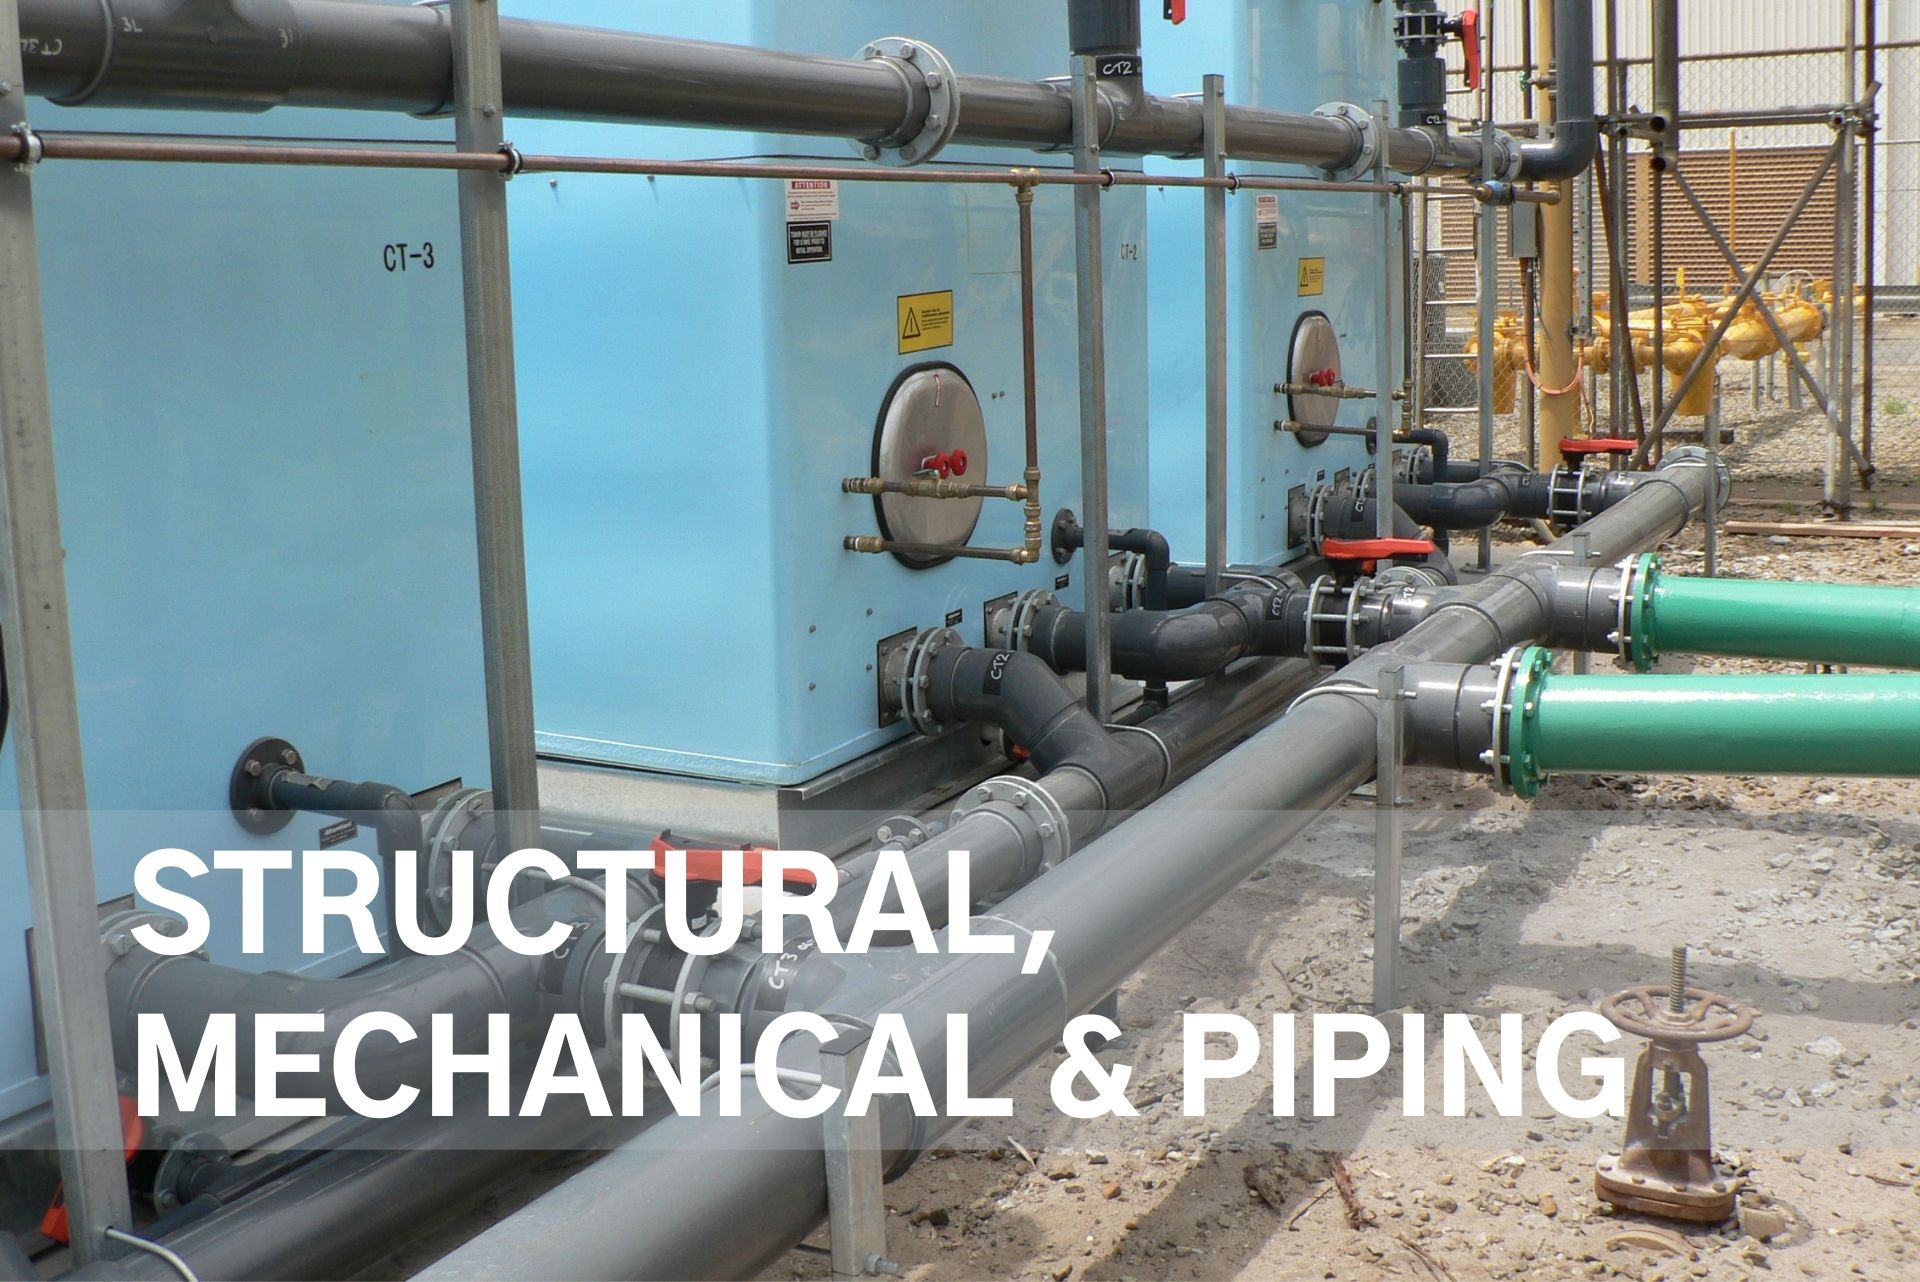 Structural Mechanical Piping